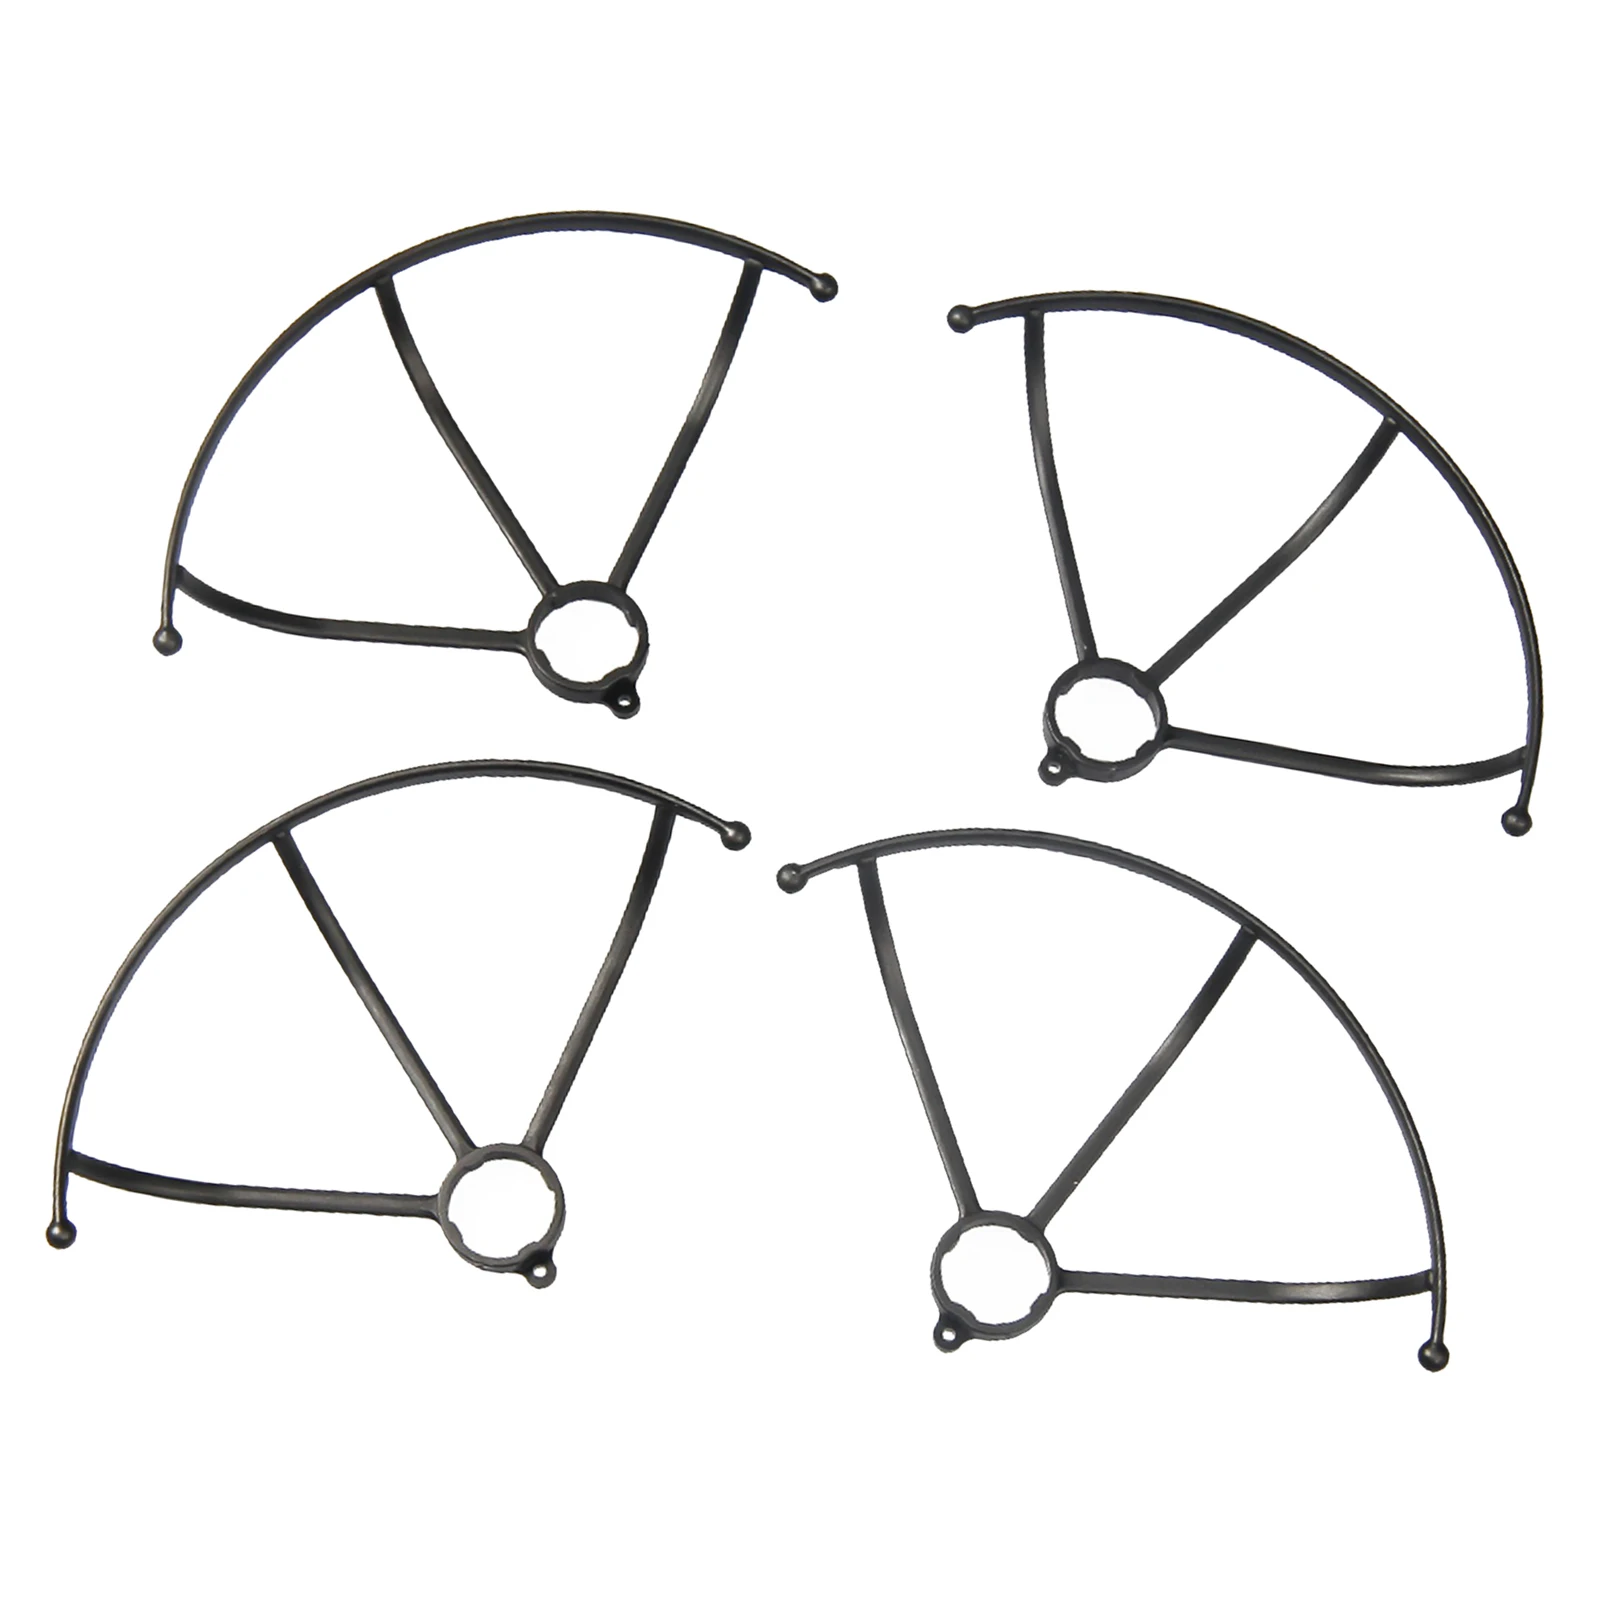 Propeller Protection Protection Cover for LS-MIN Mini Drone RC Quadcopter